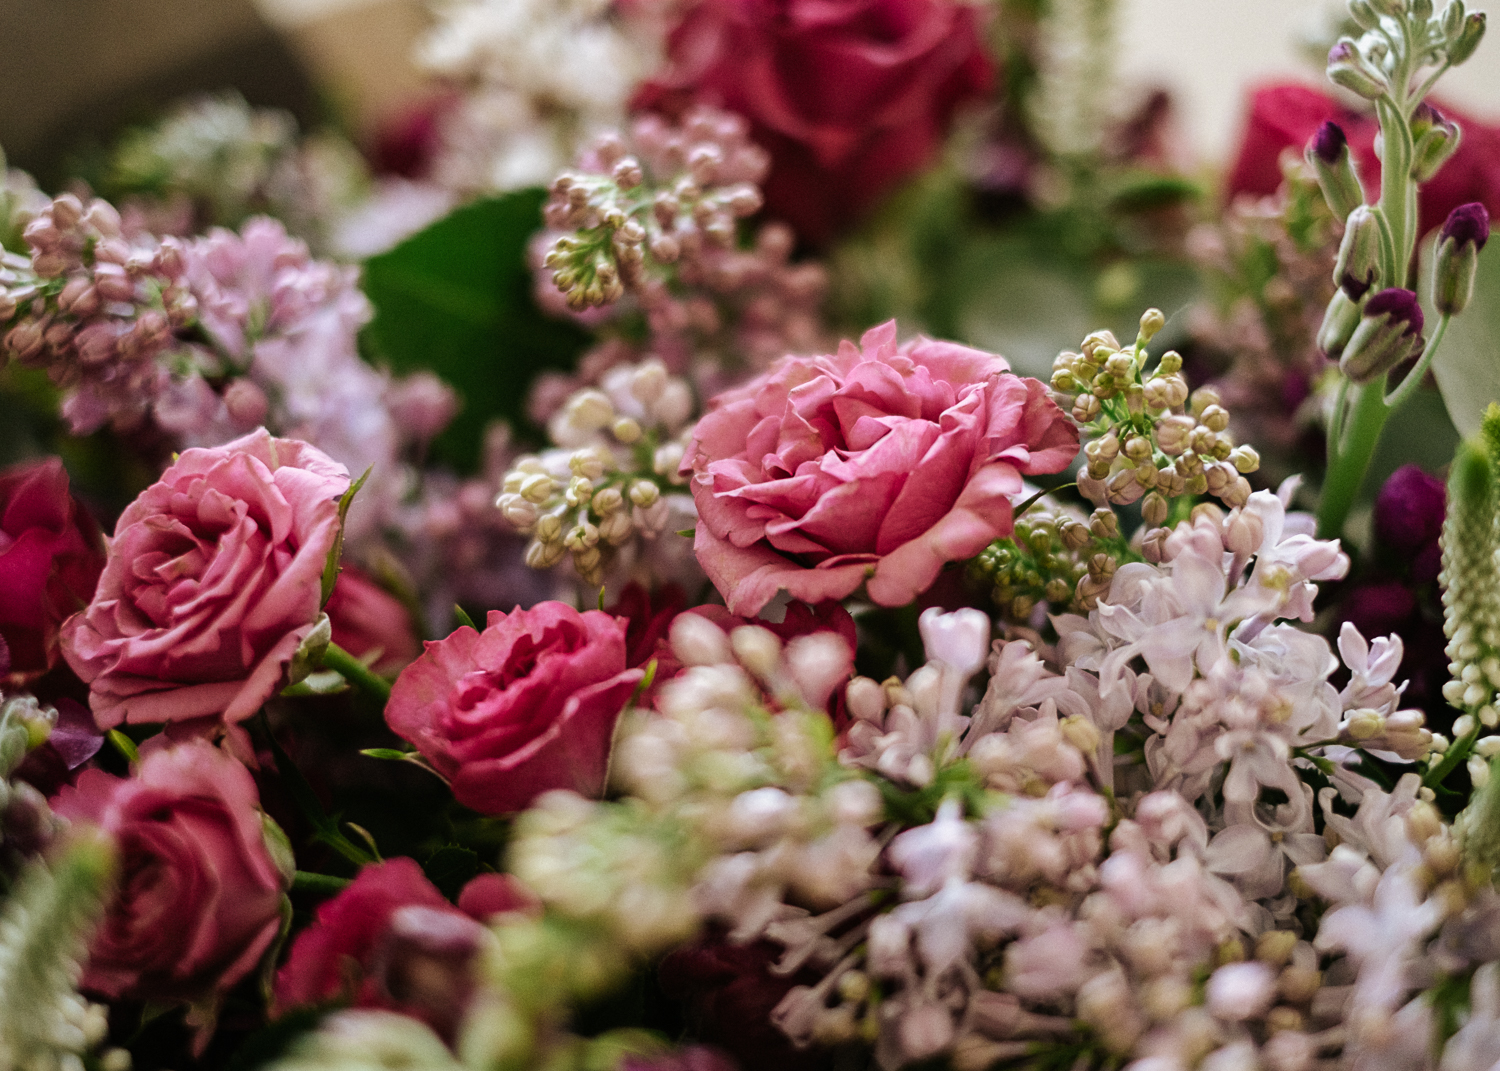 colour palette for your wedding flowers bright pink